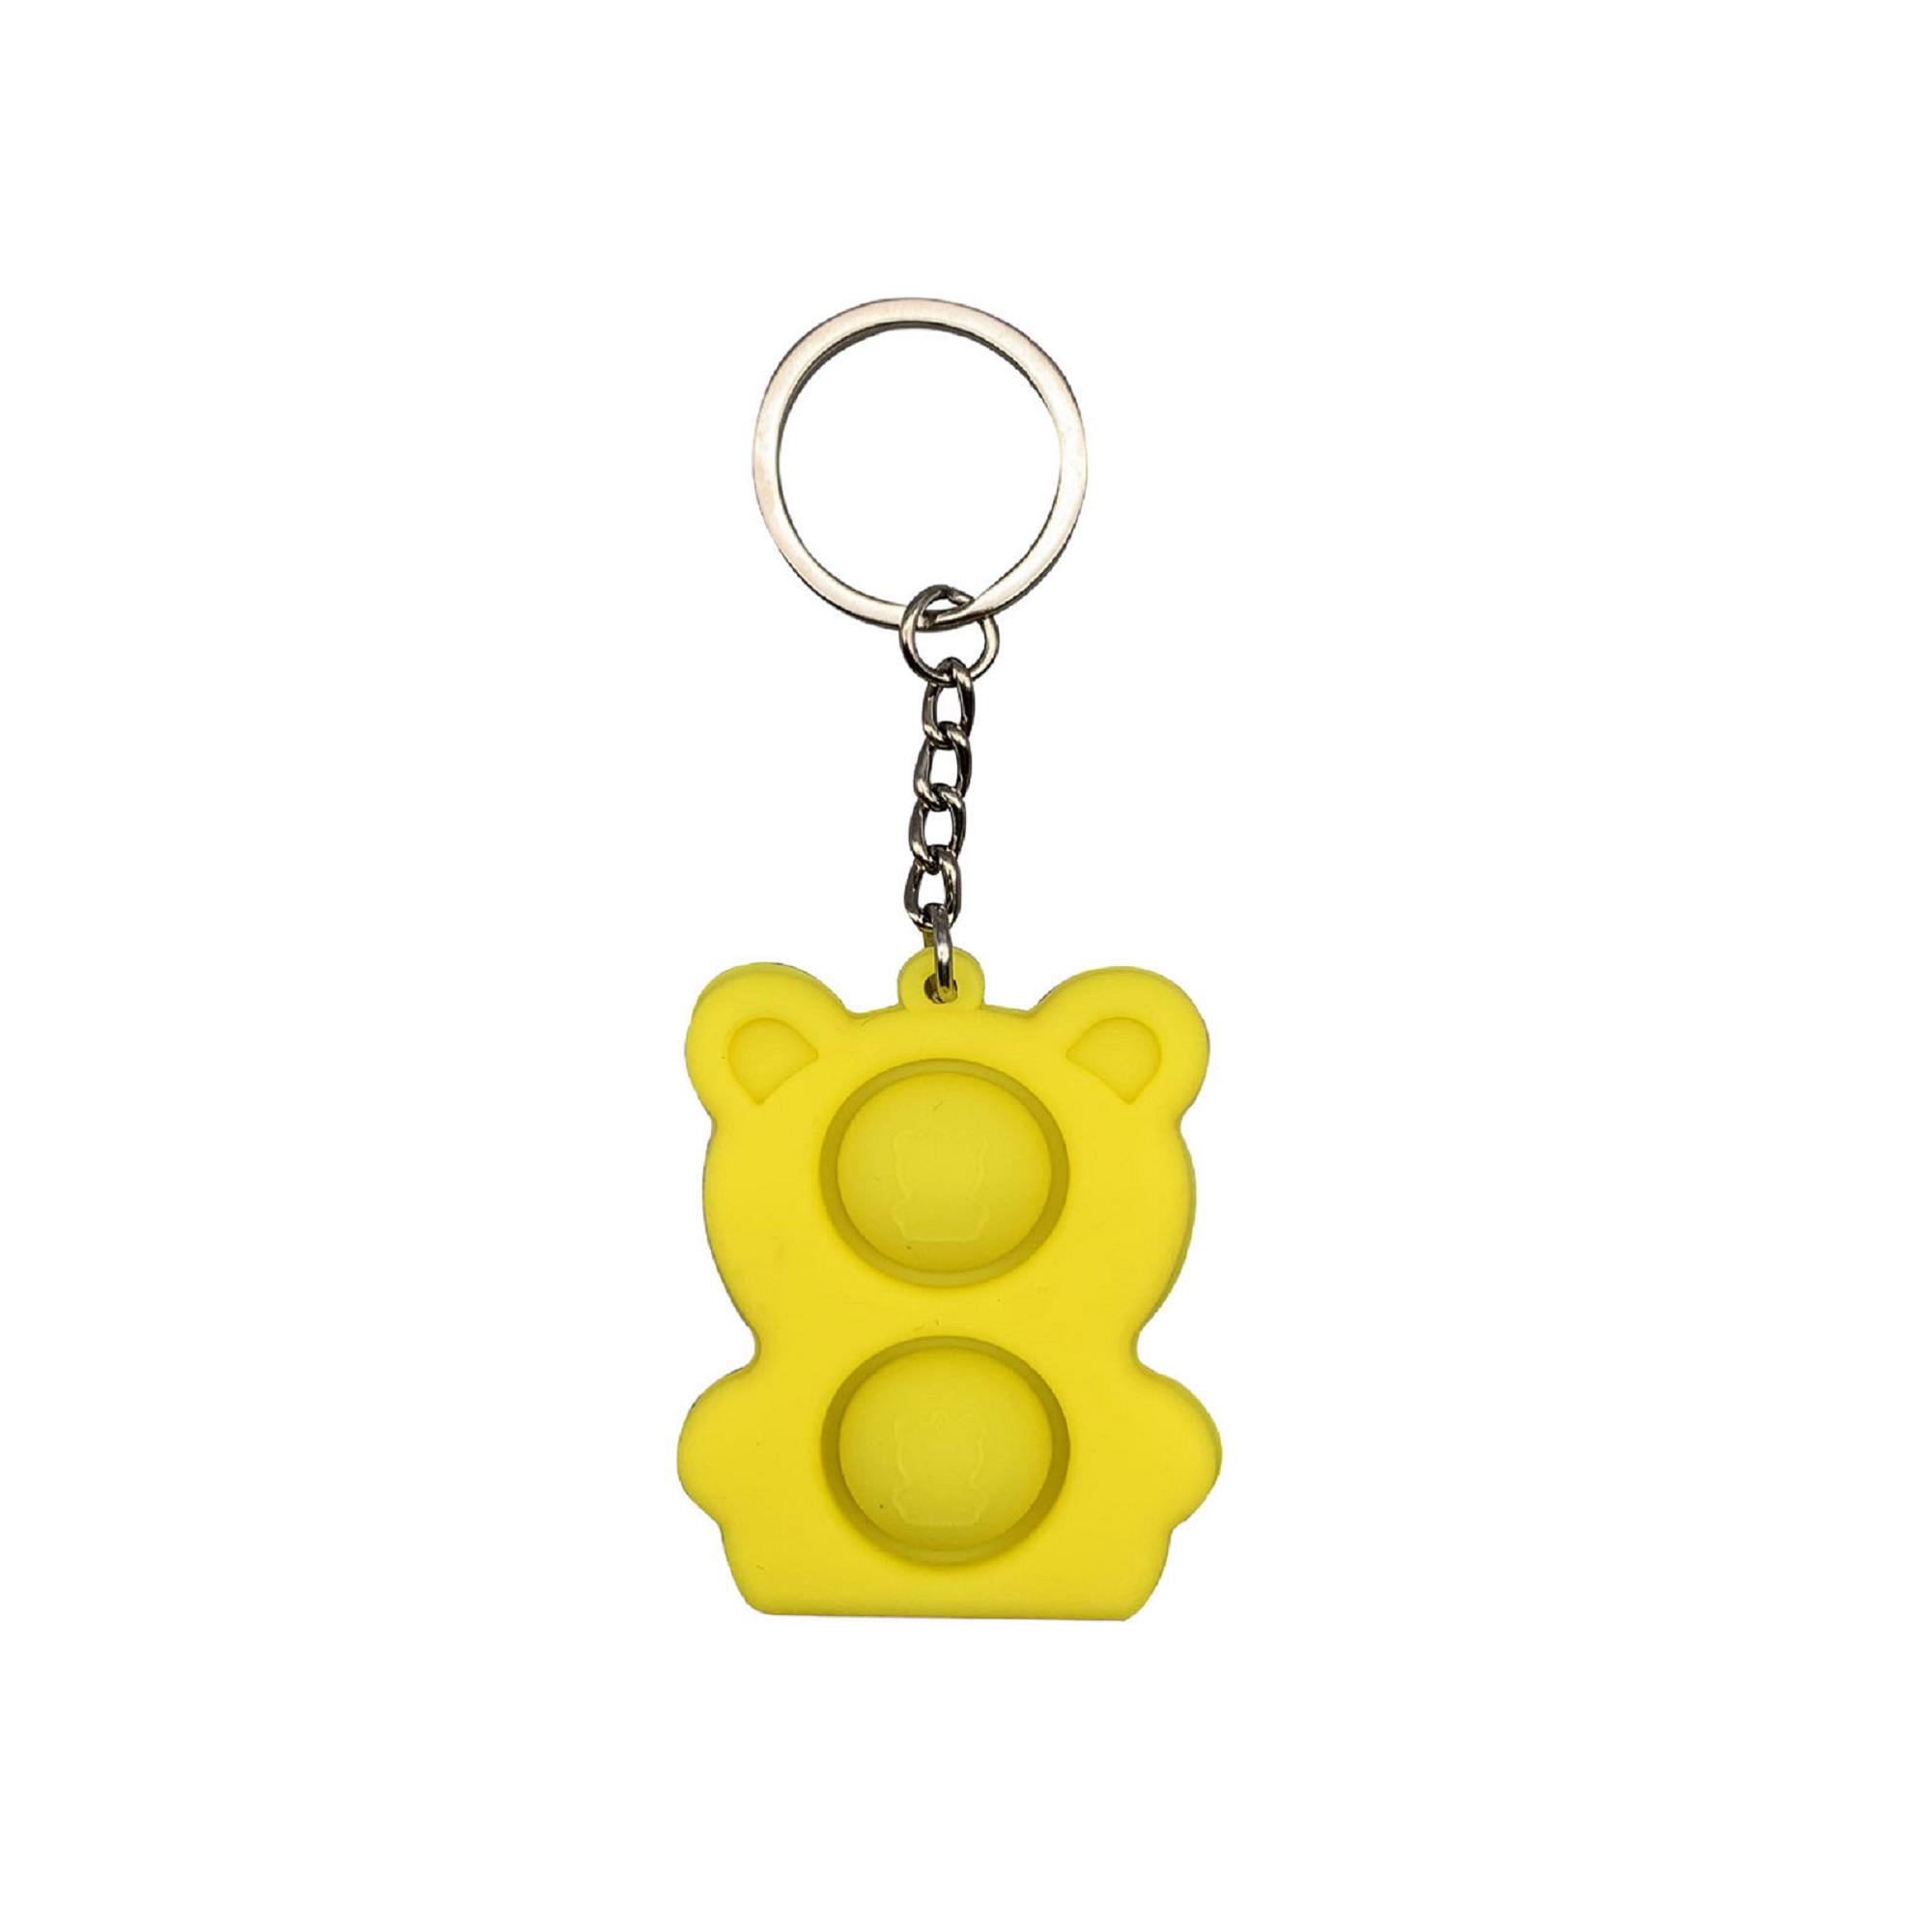 Popper Keychain for Stress Relief Autism Key Ring #SO7 Simple Dimple Fidget Toy 